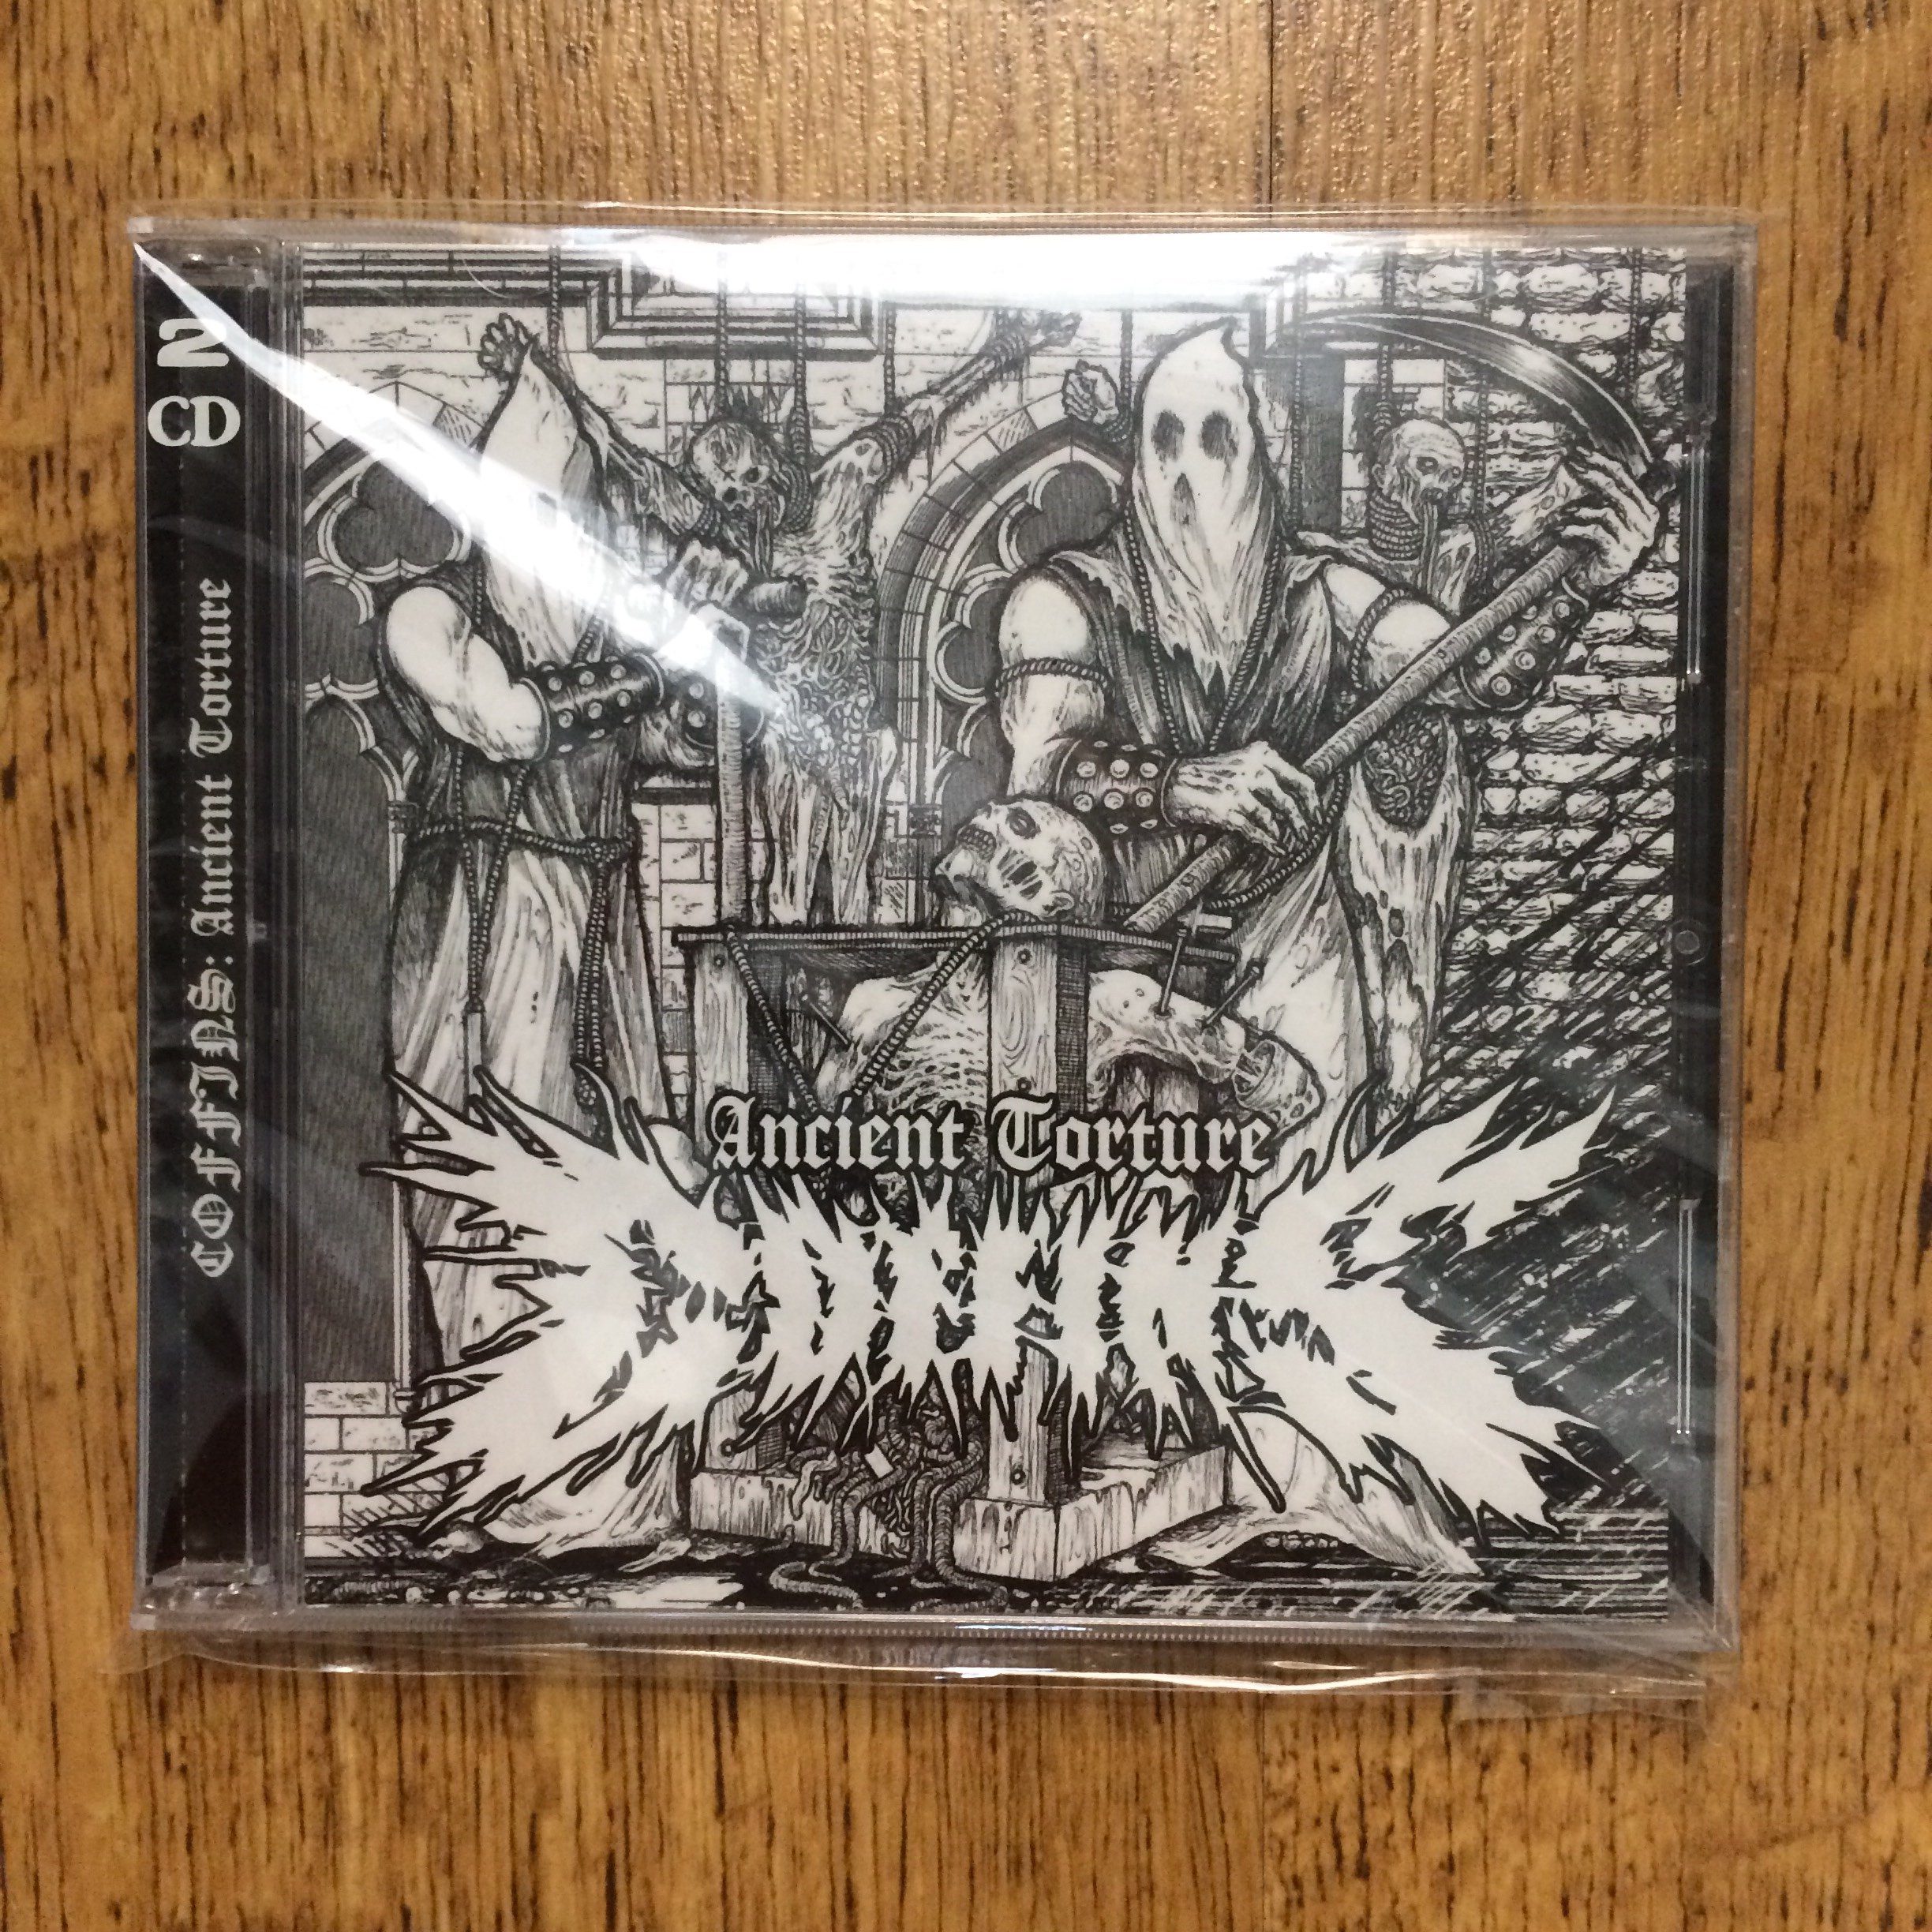 Photo of the Coffins - "Ancient Torture" 2CD